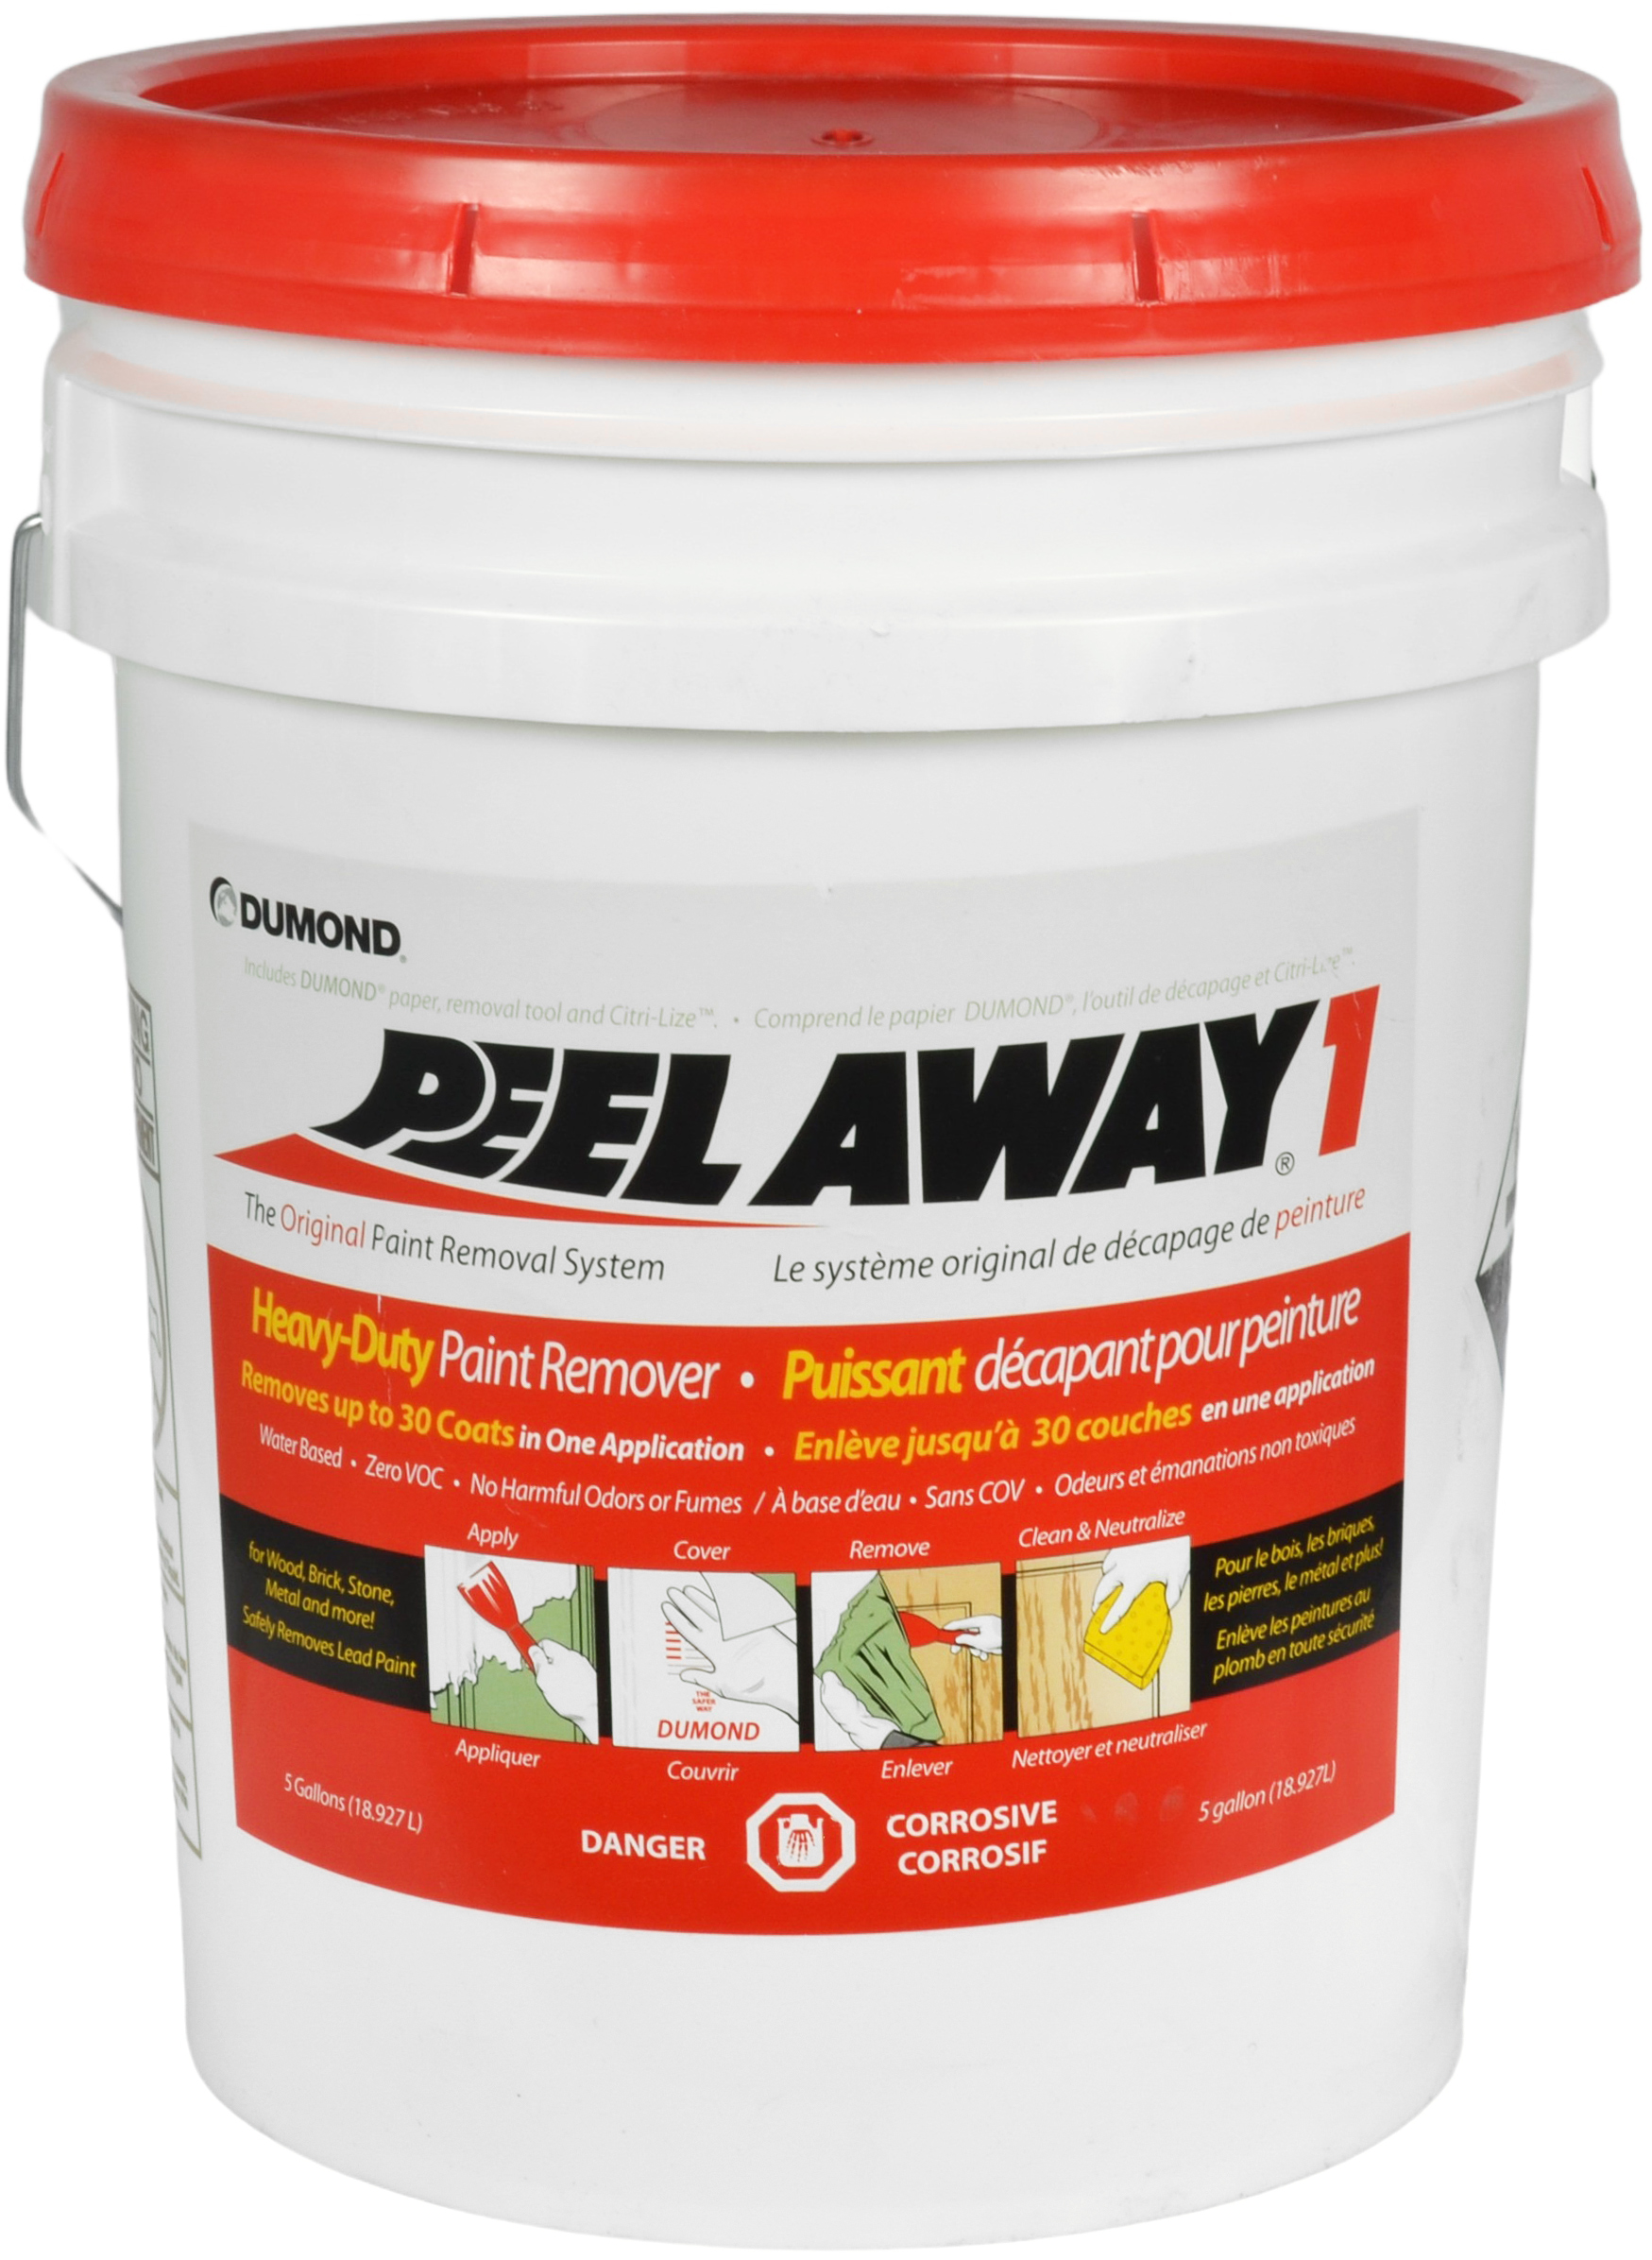 Peel Away® 1 Heavy Duty Paint Remover Complete Removal System - Janovic